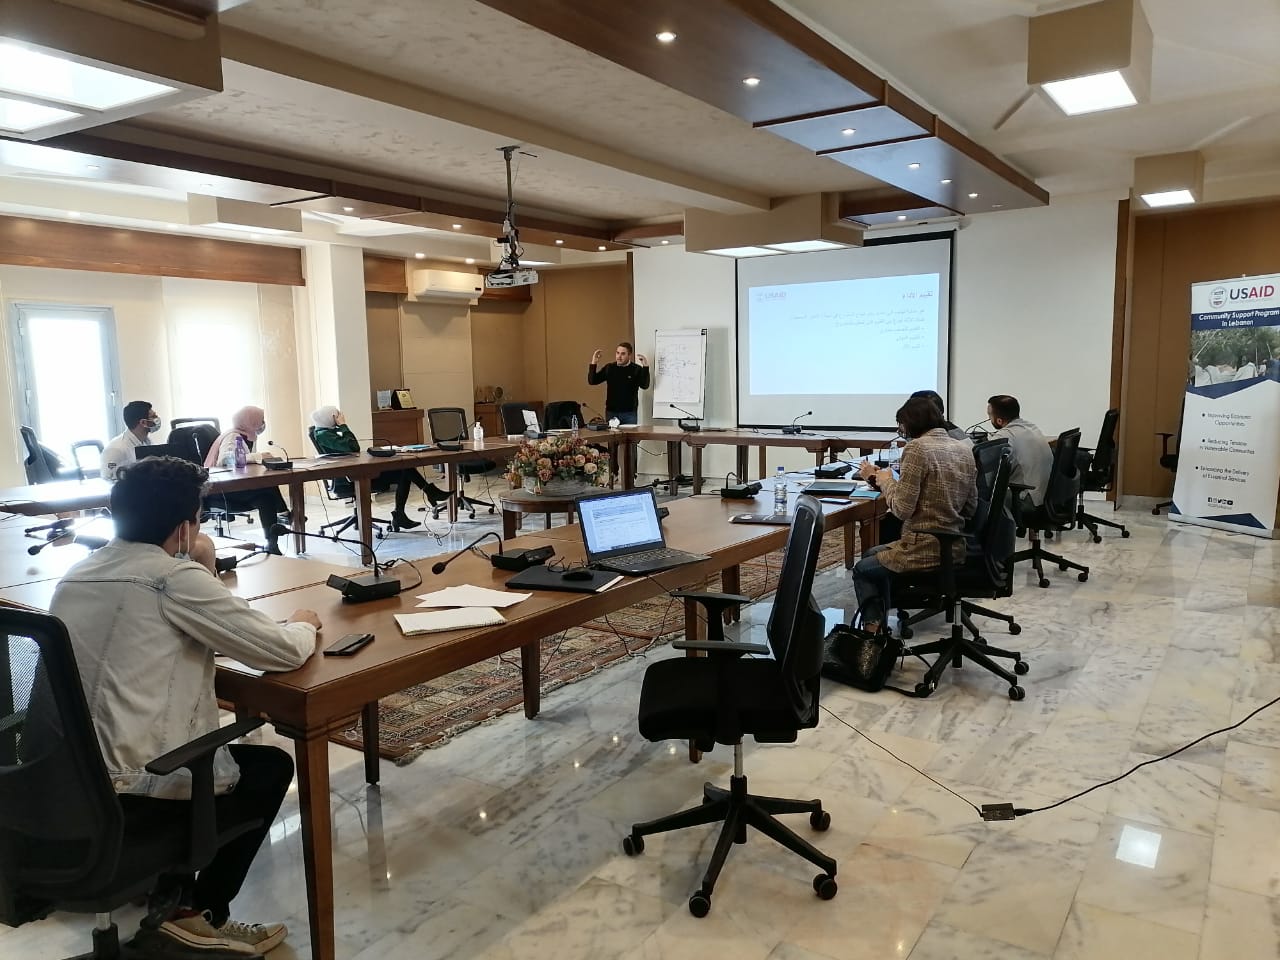 Technical Support of the Municipality of East Saida